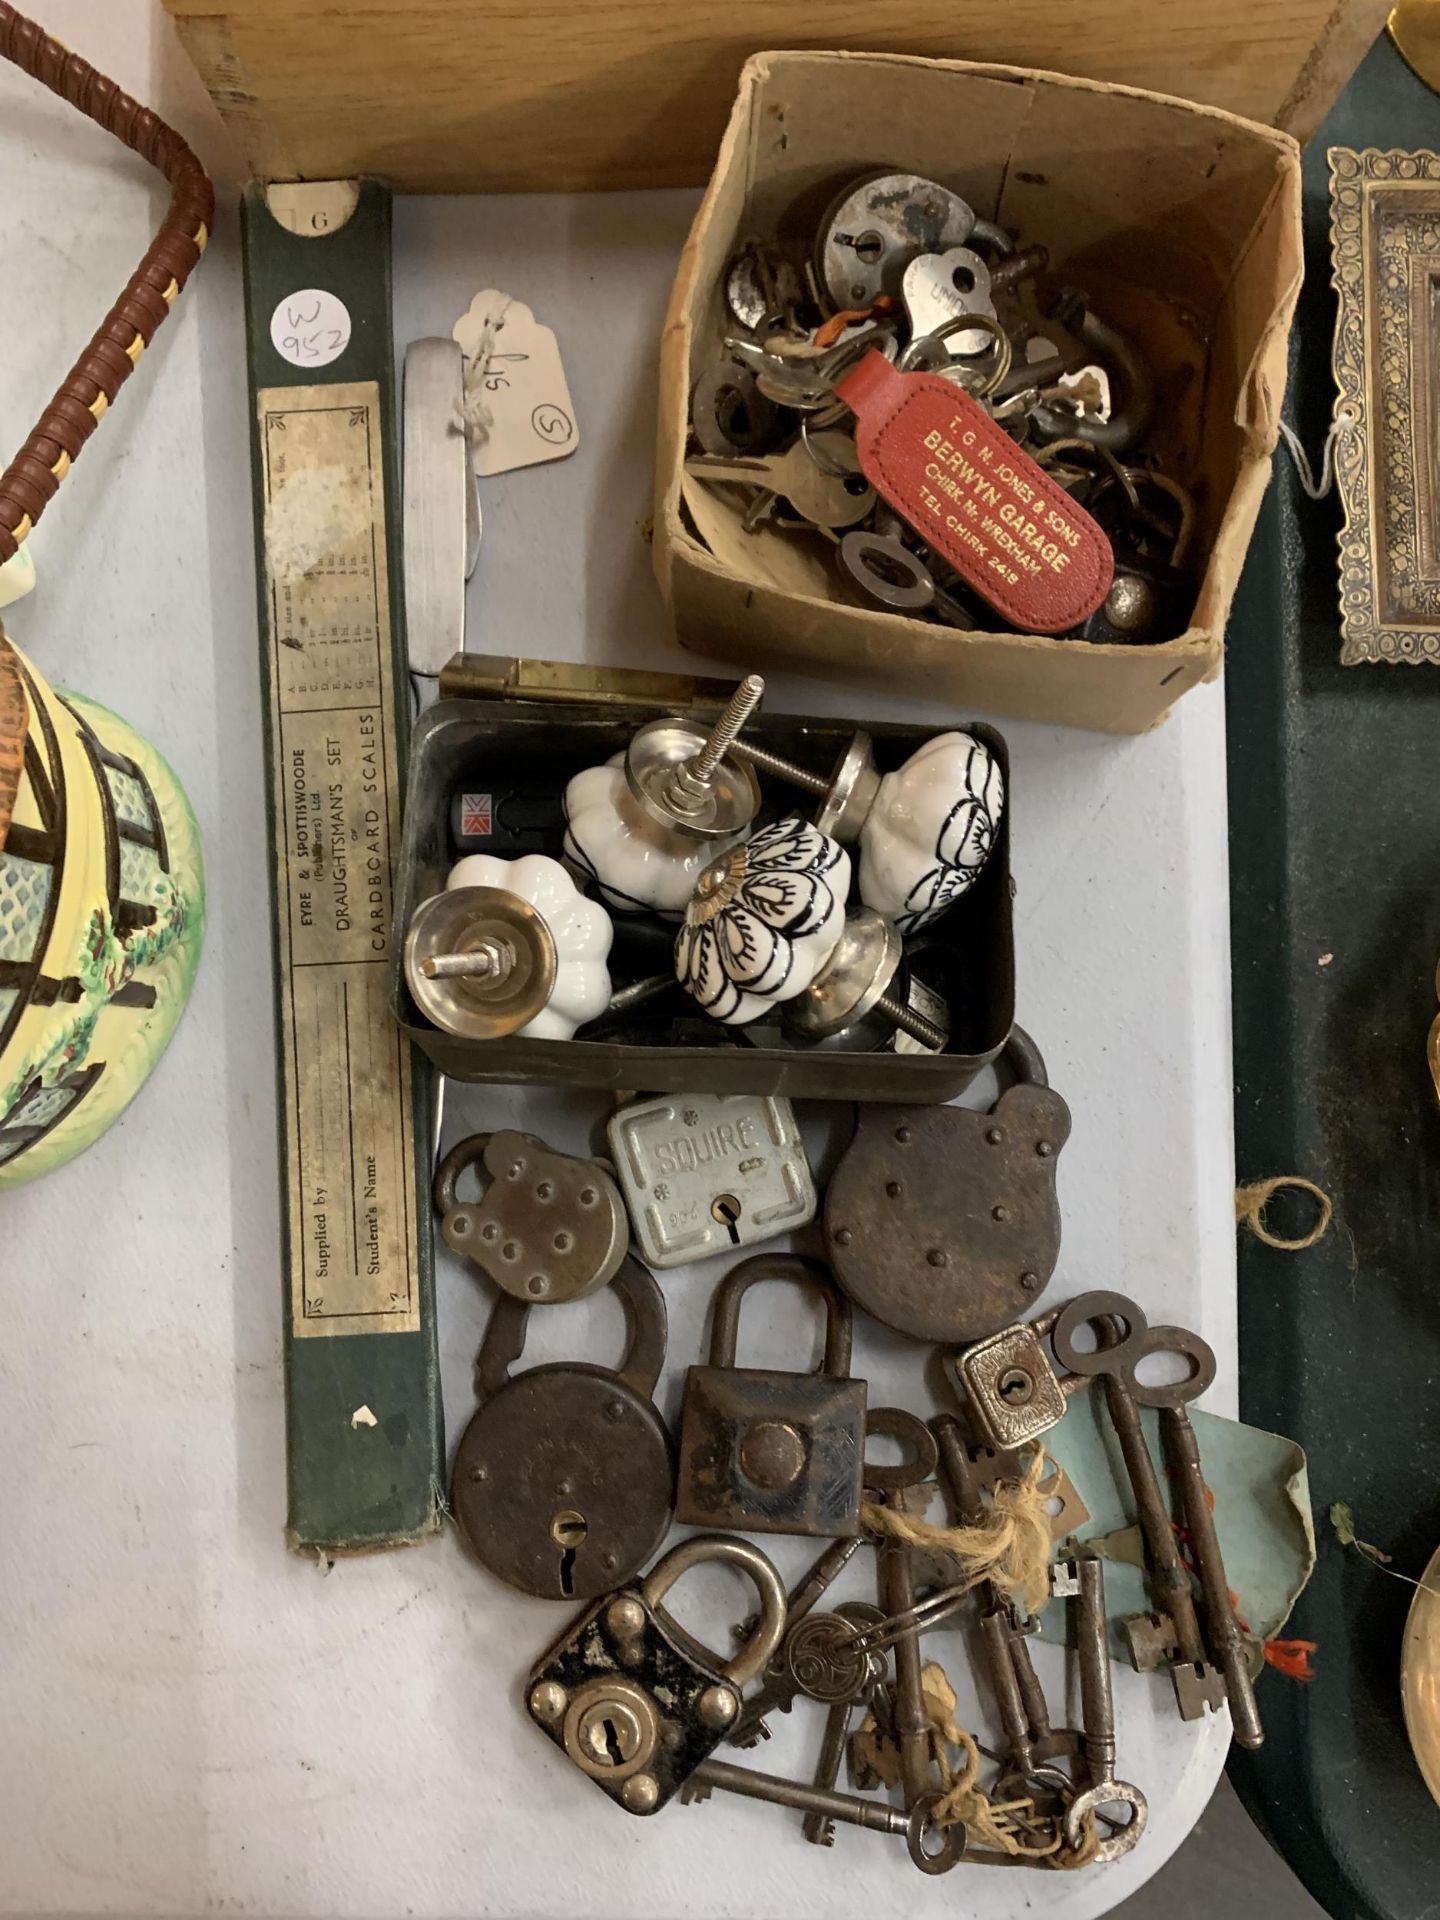 A MIX OF ITEMS TO INCLUDE VINTAGE LOCKS, KEYS, A DRAUGHTSMANS SET OF CARDBOARD SCALES, CERAMIC